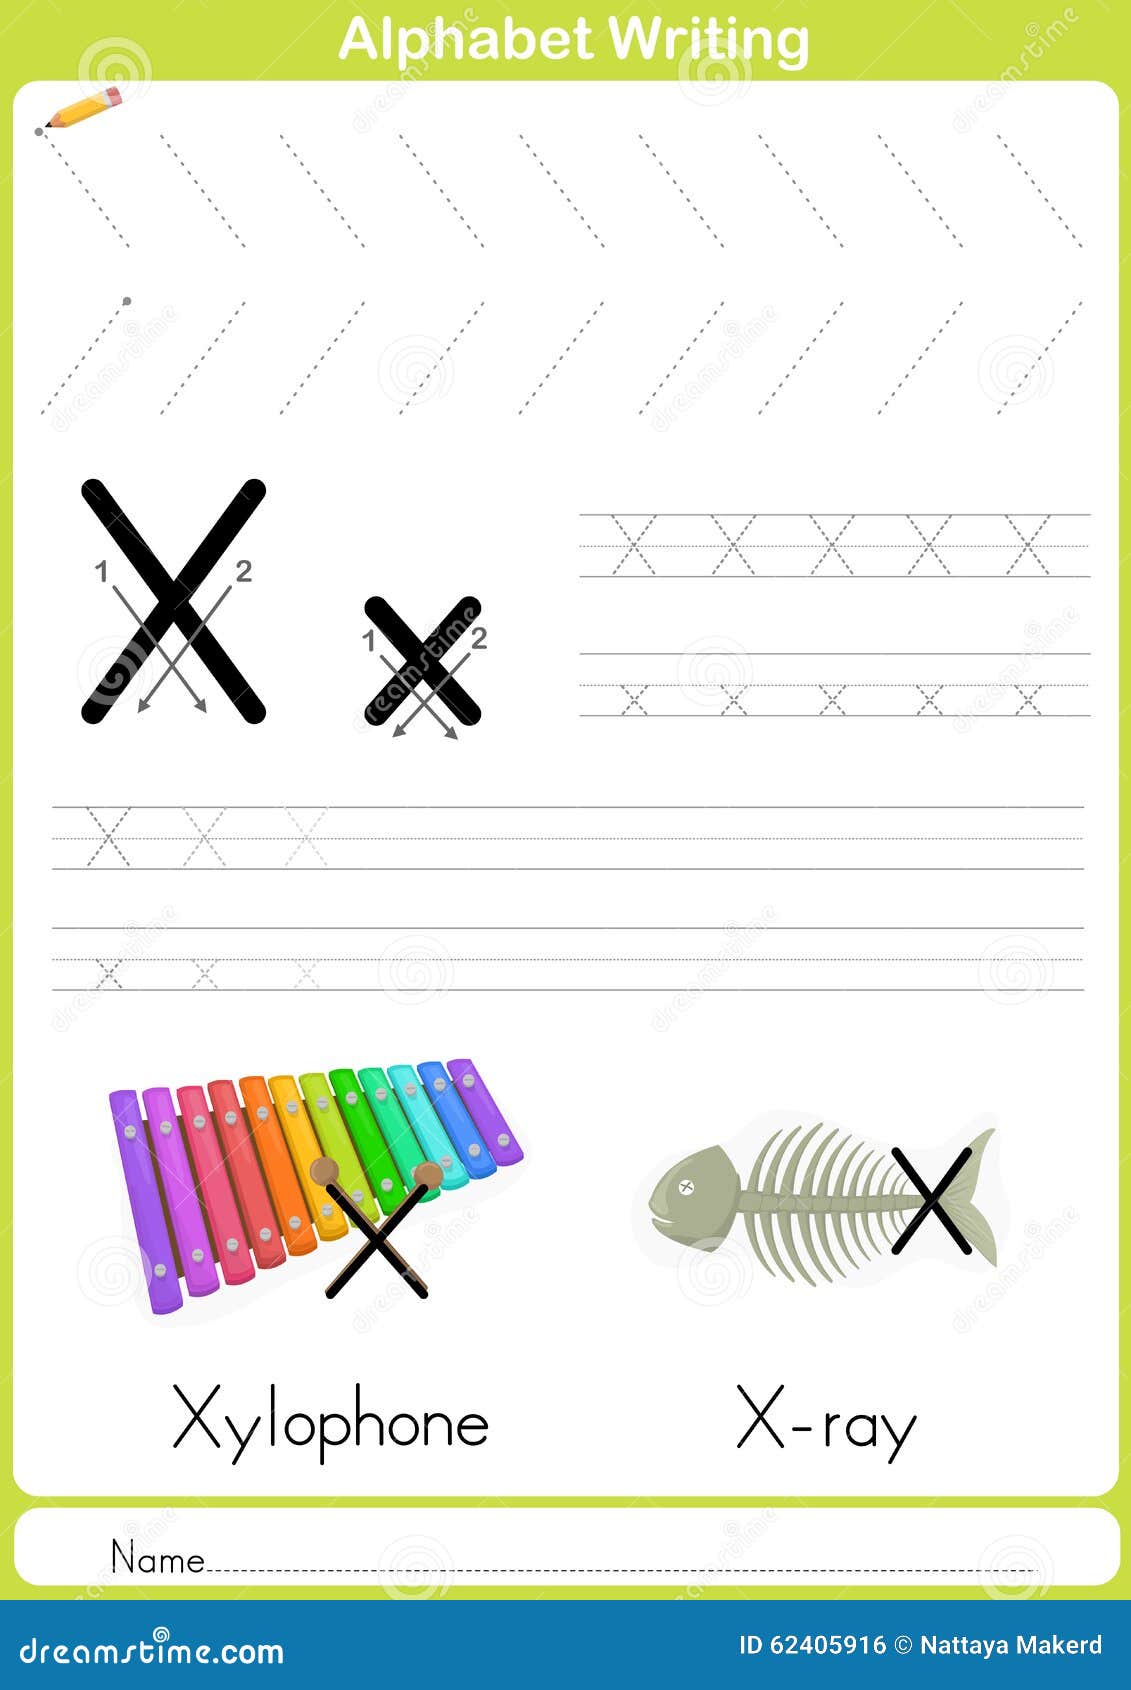 Alphabet a-Z Tracing Worksheet, Exercises for Kids - A4 Paper Ready To ...